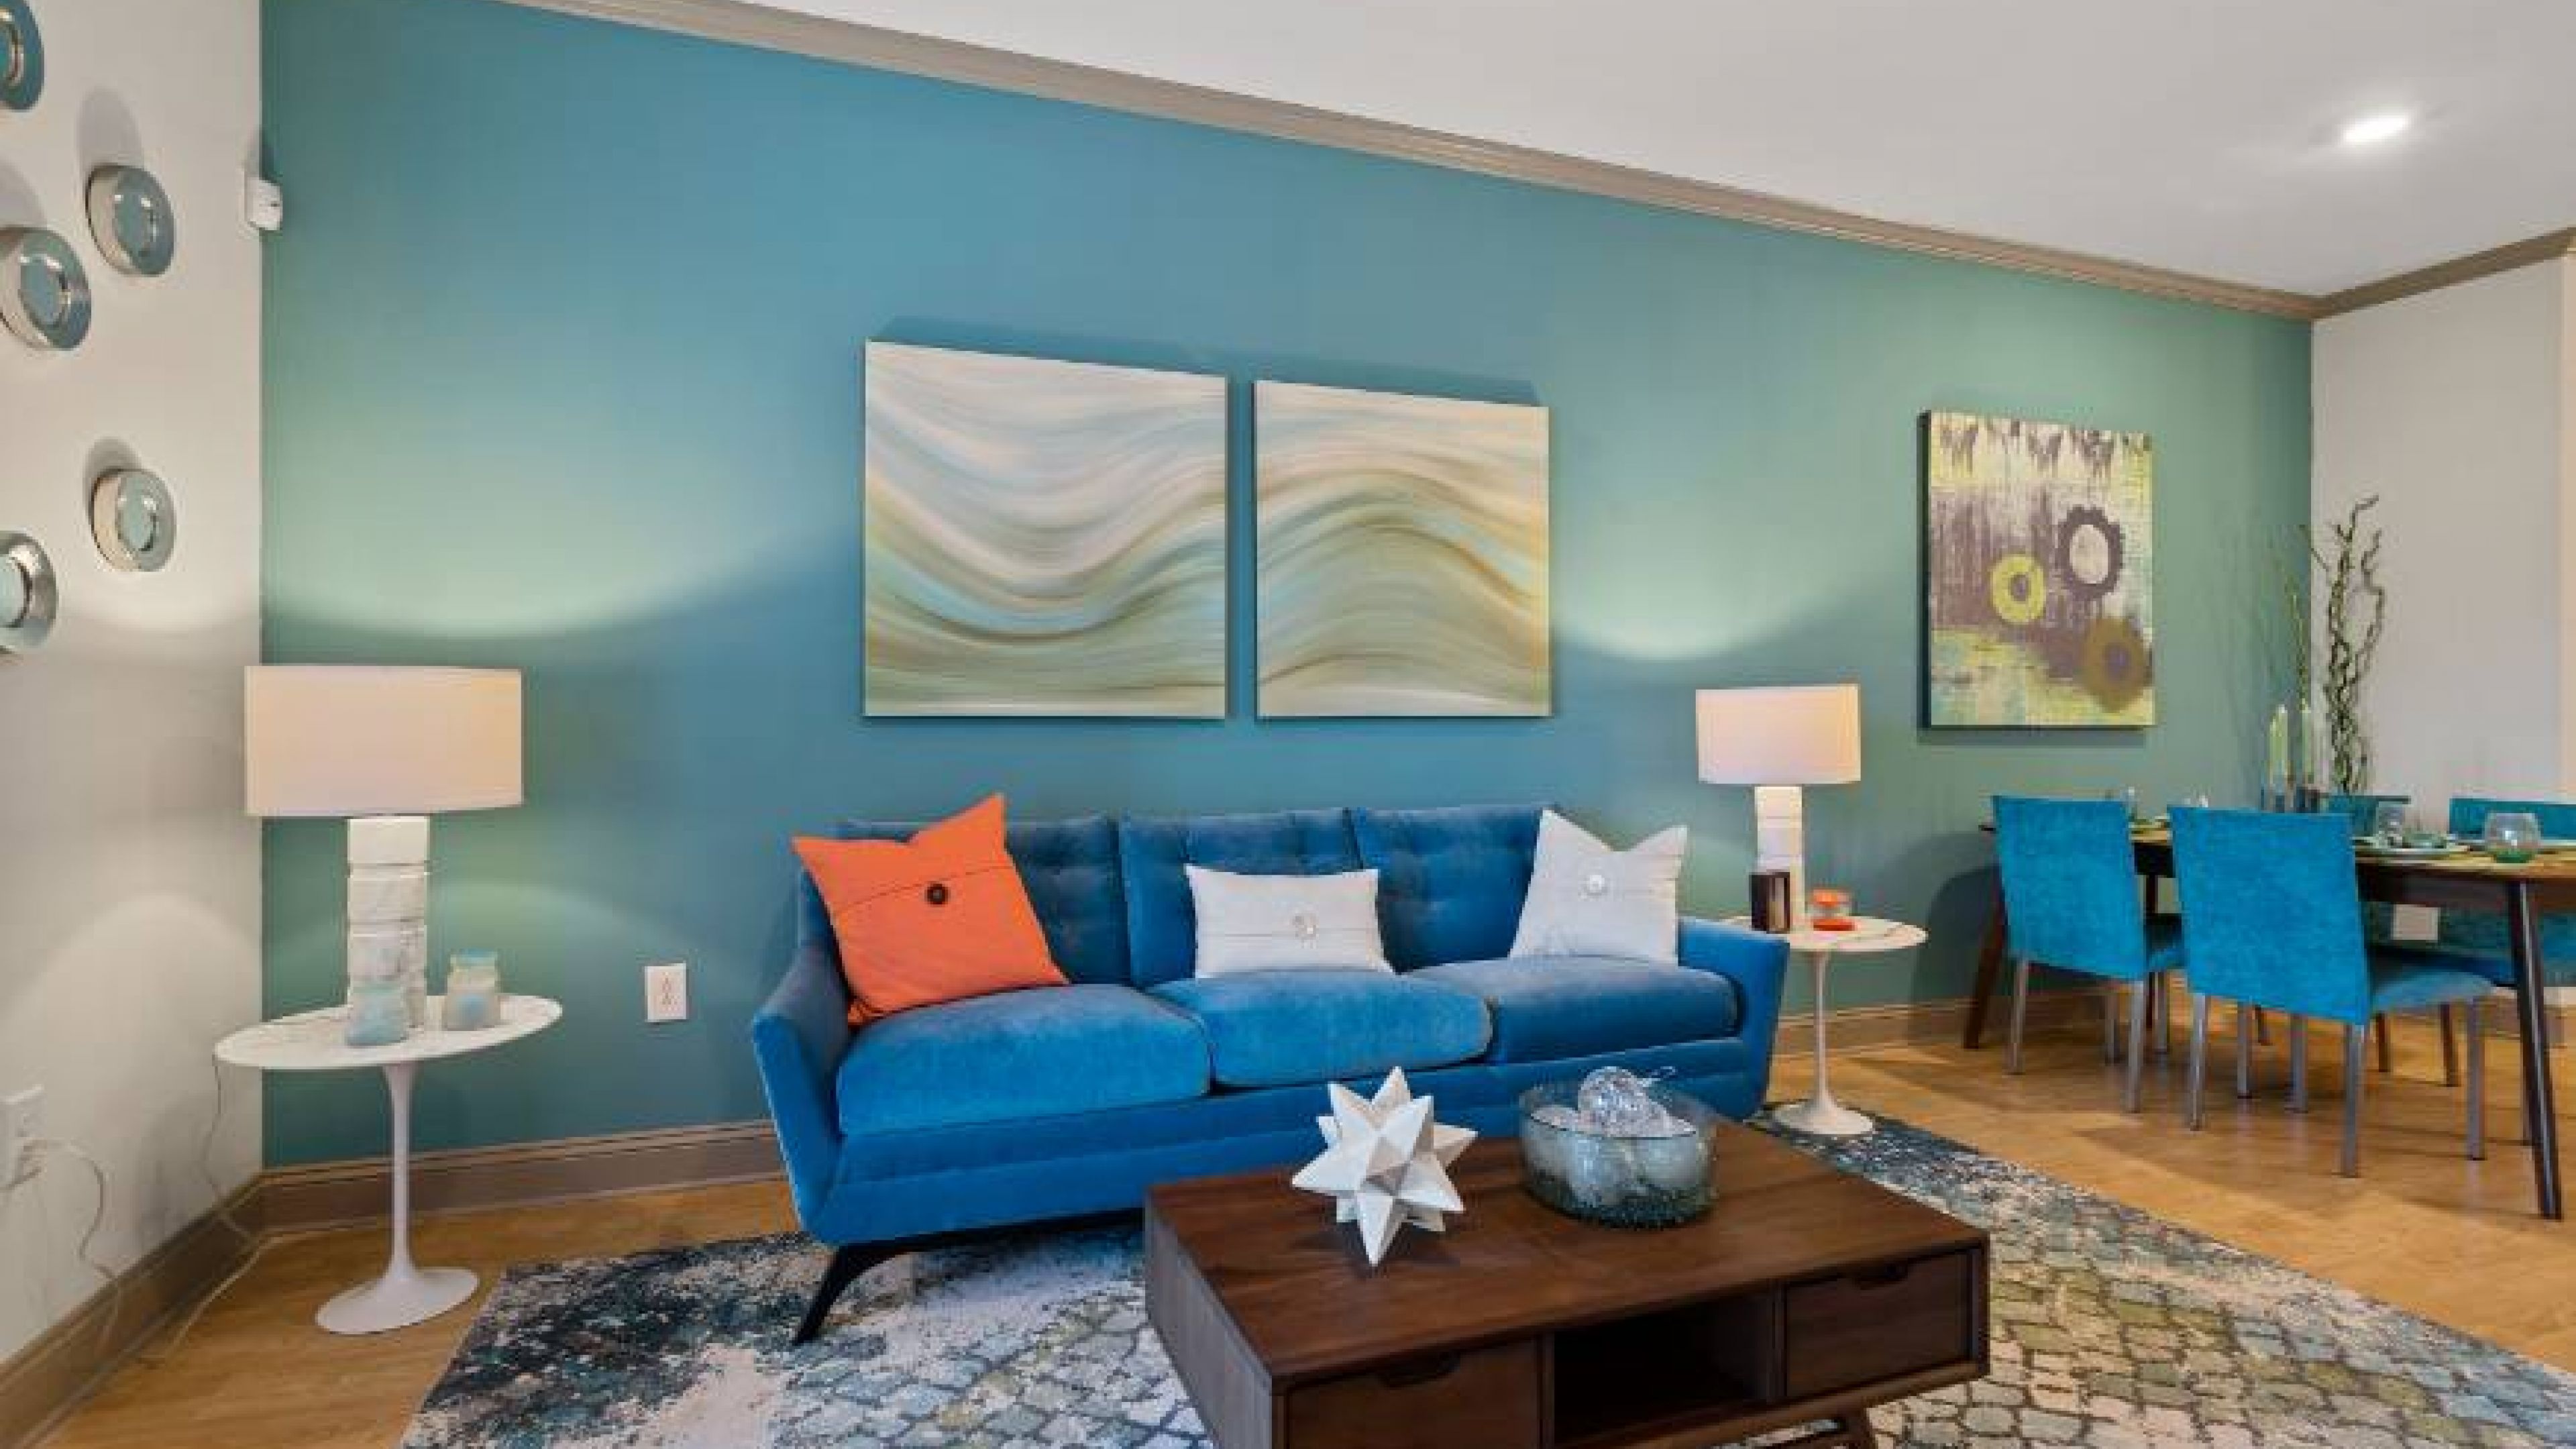 Hawthorne at Southside apartment with a cozy living room with soothing blue walls and a matching blue couch, creating a serene ambiance